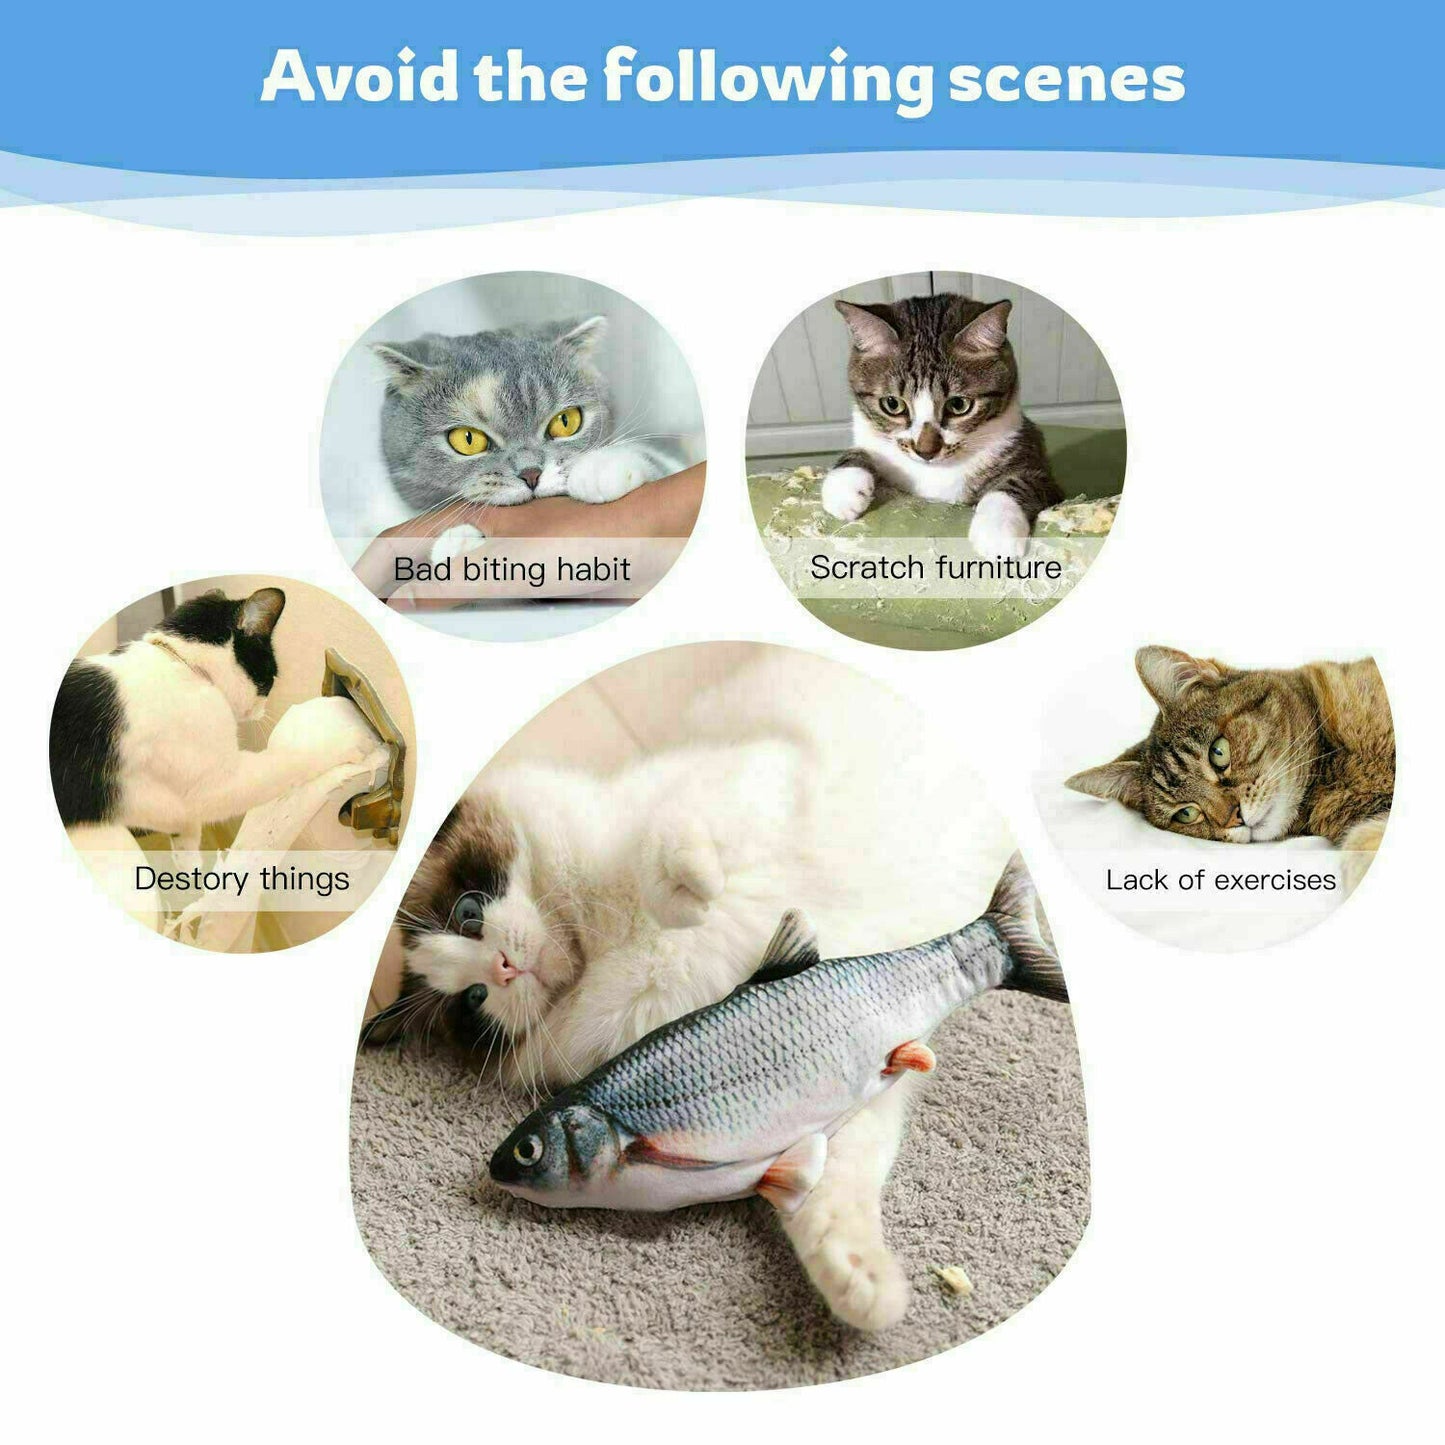 electric flopping realistic interactivetoy fish for cat (us warehouse)